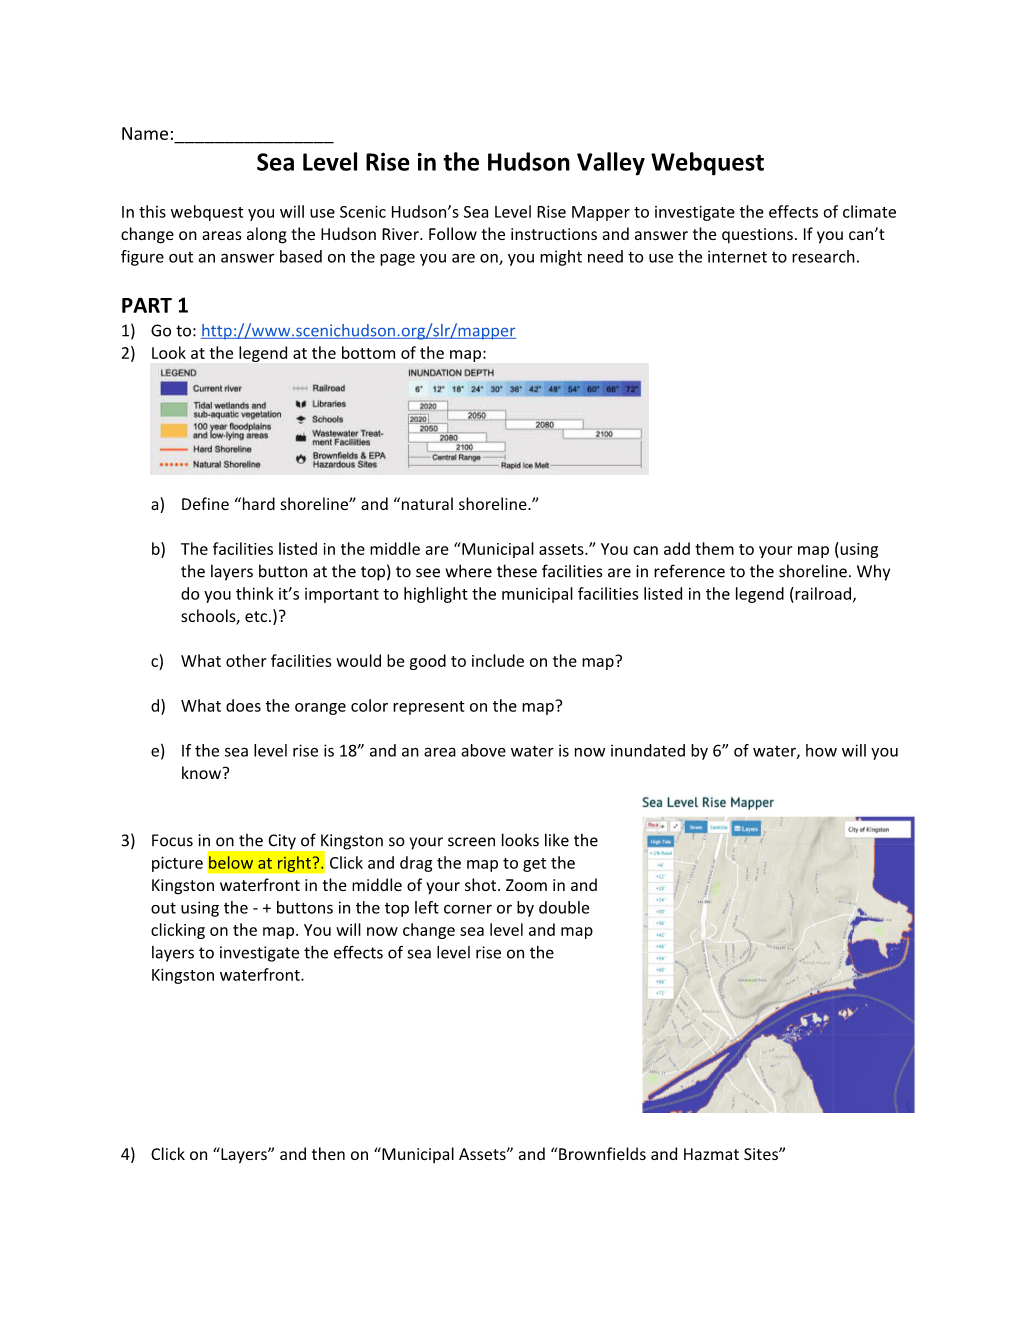 Sea Level Rise in the Hudson Valley Webquest